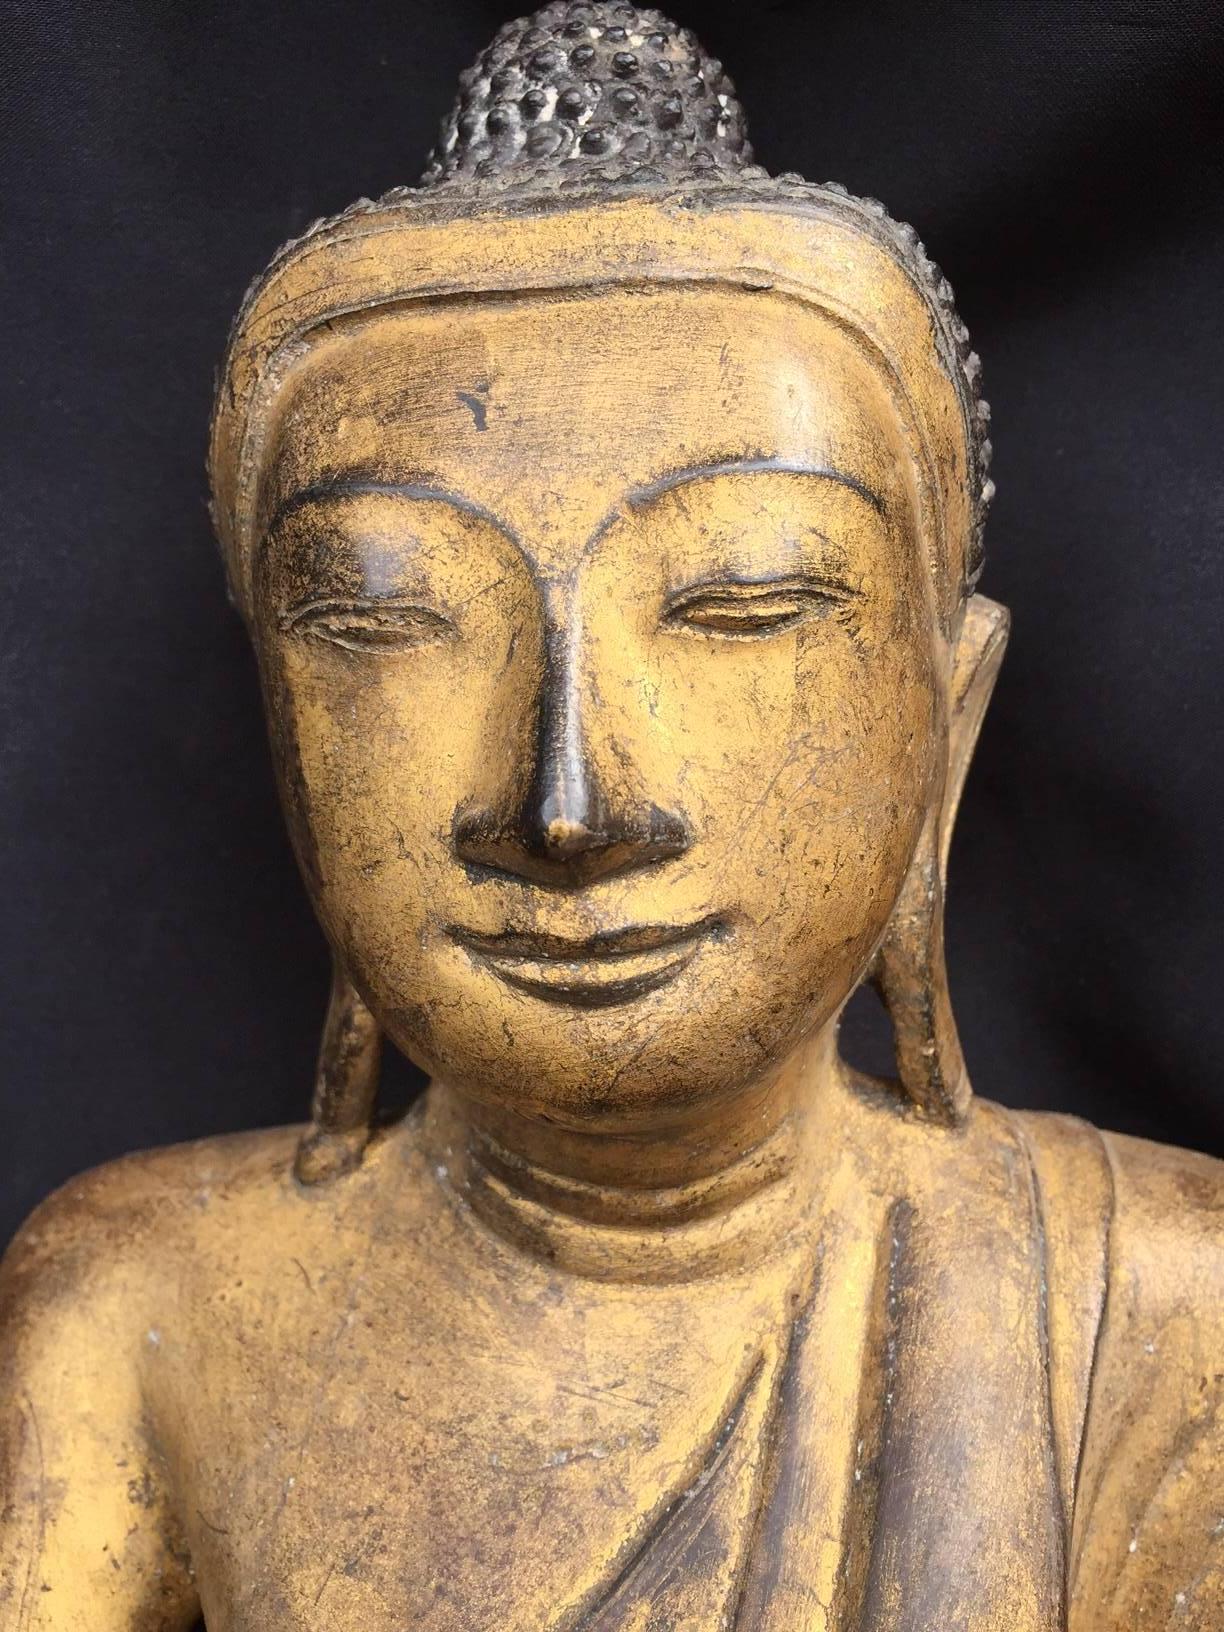 Myanmar, Burma, Mandalay, a fine gilt bronze seated Buddha dating to the 19th century. The effigy of the Buddha with realistic and joyful face cast I solid bronze and gilded with modest wear from appropriate age. A good consideration for your